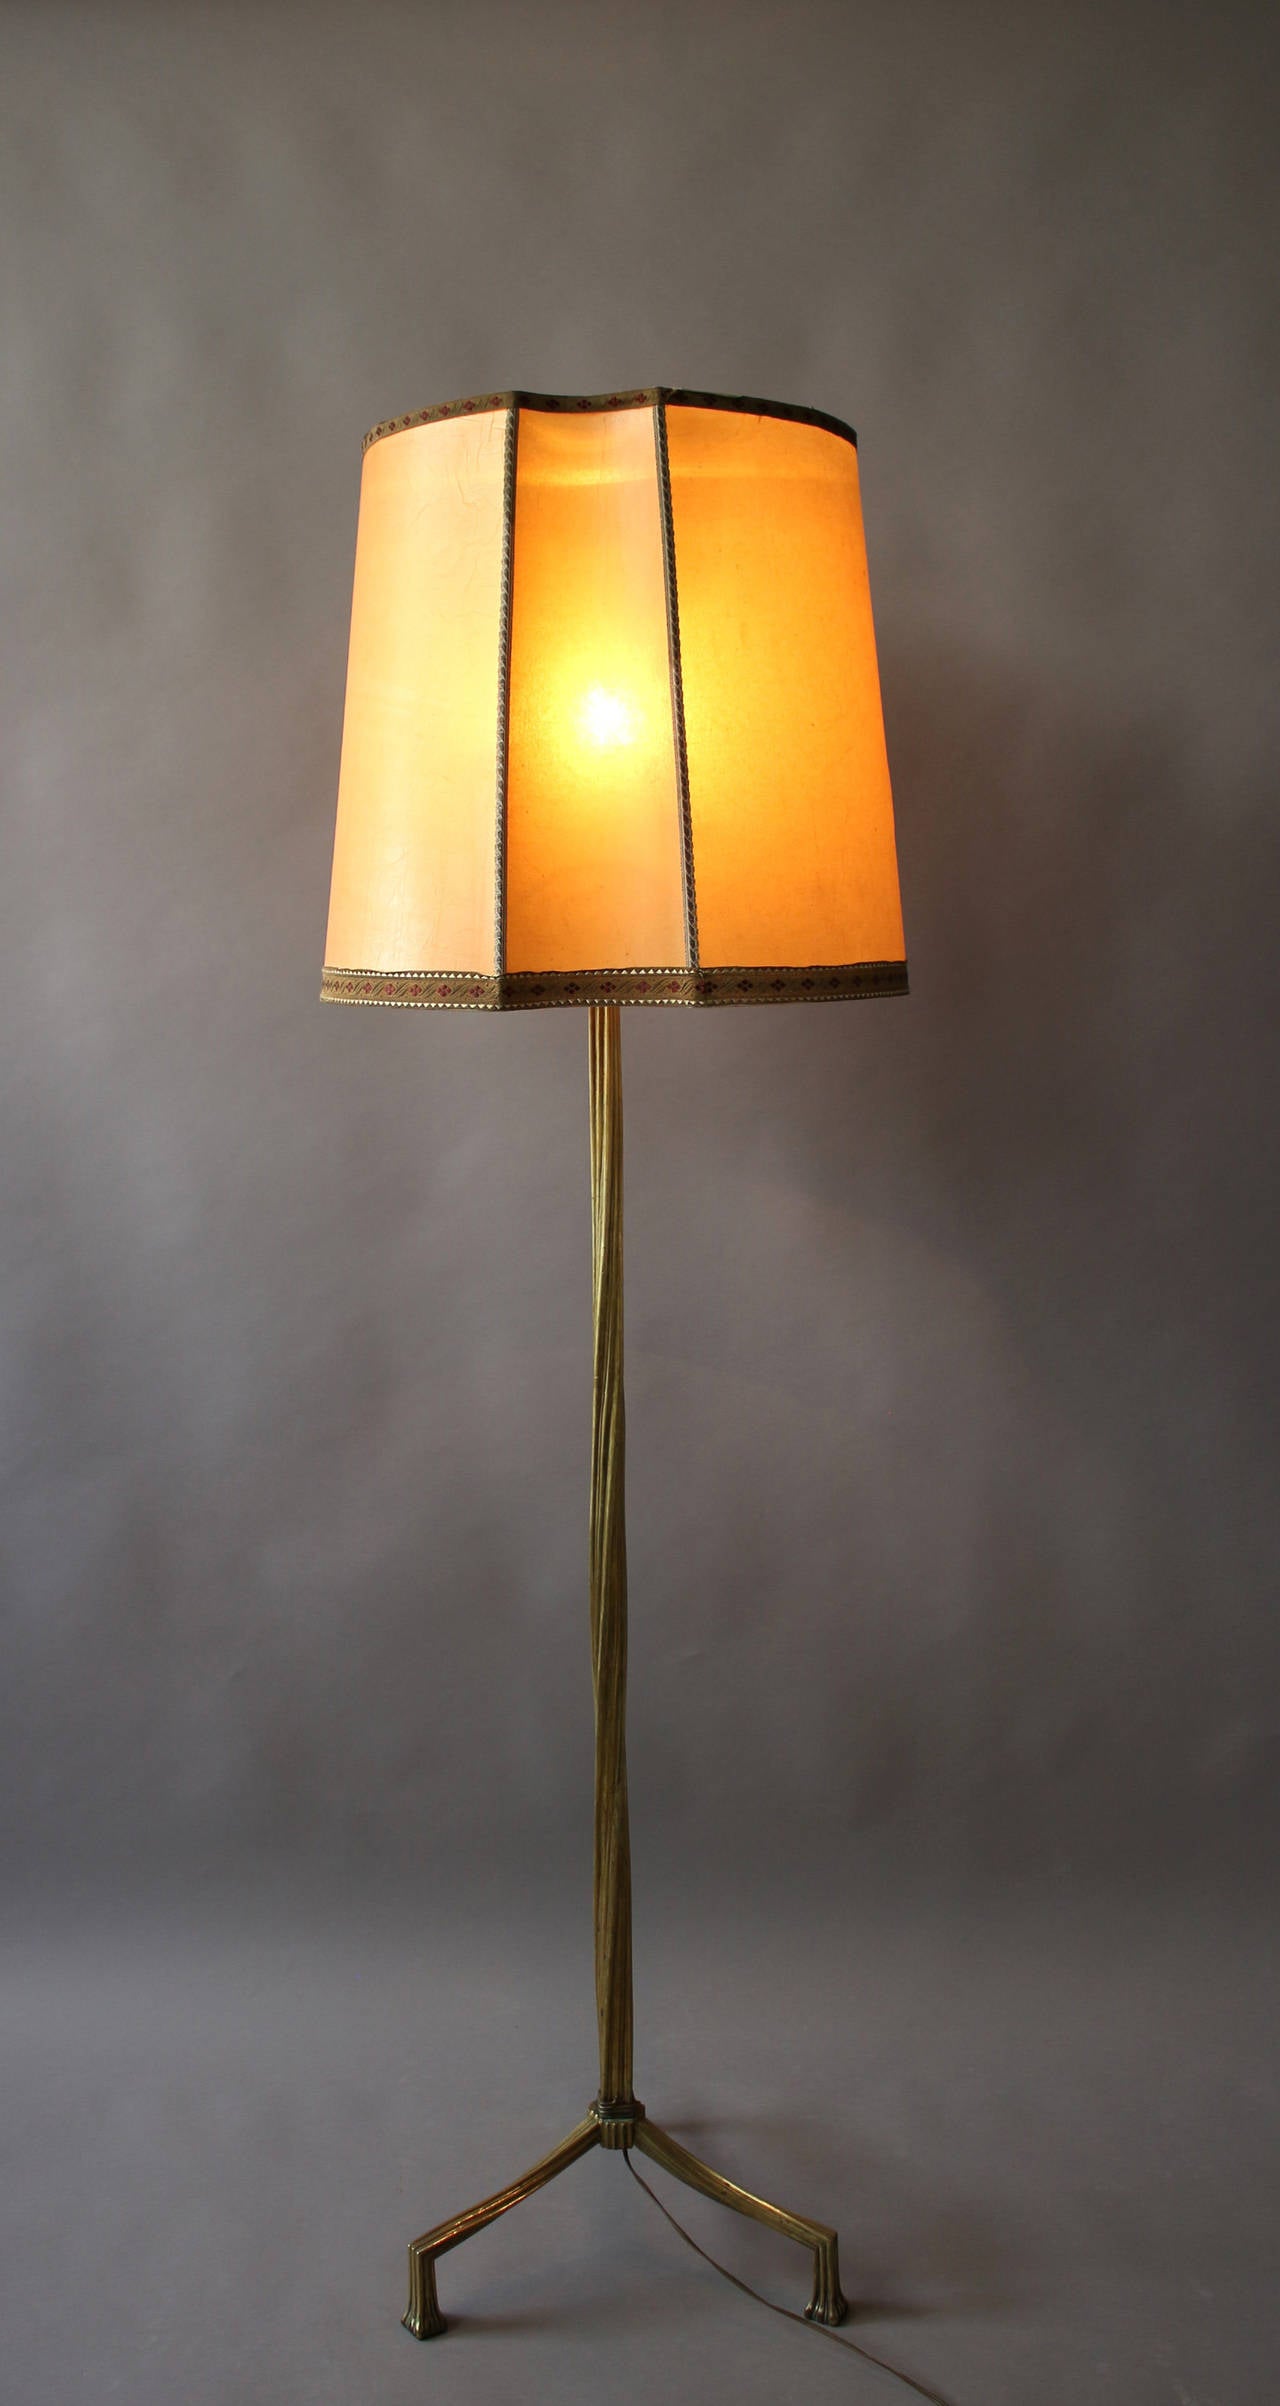 Fine and elegant French Art Deco twisted bronze stems and tripod base floor lamp. (Diameter posted is at tripod base).